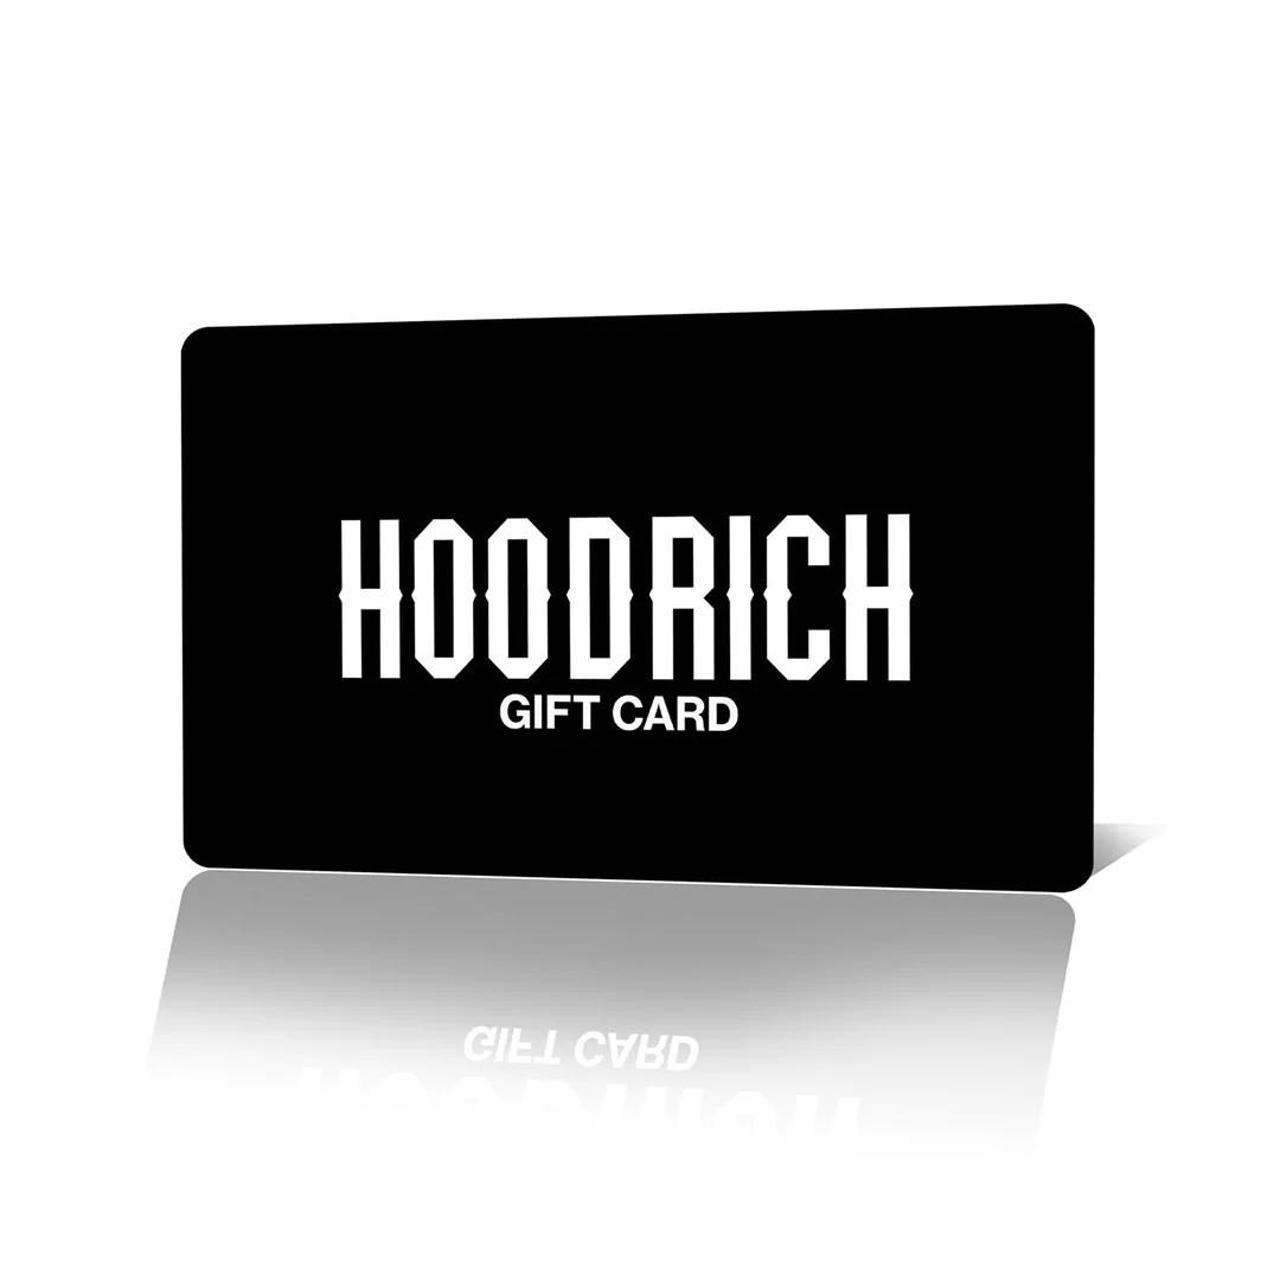 £5 hoodrich code will be emailed to you within... - Depop